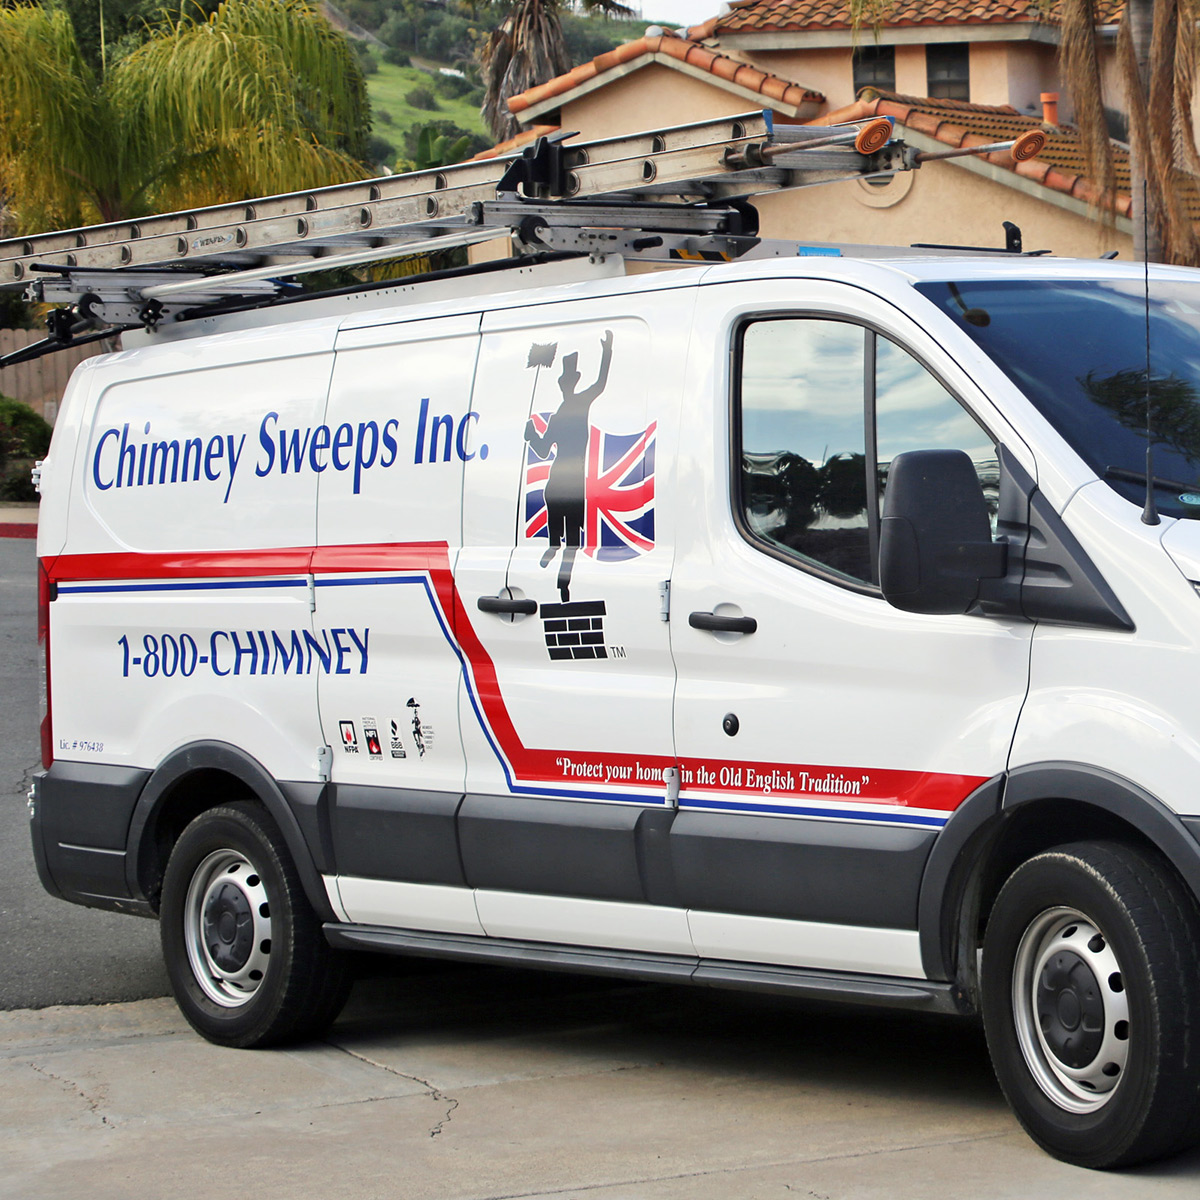 professional chimney & fireplace services in Encinitas CA